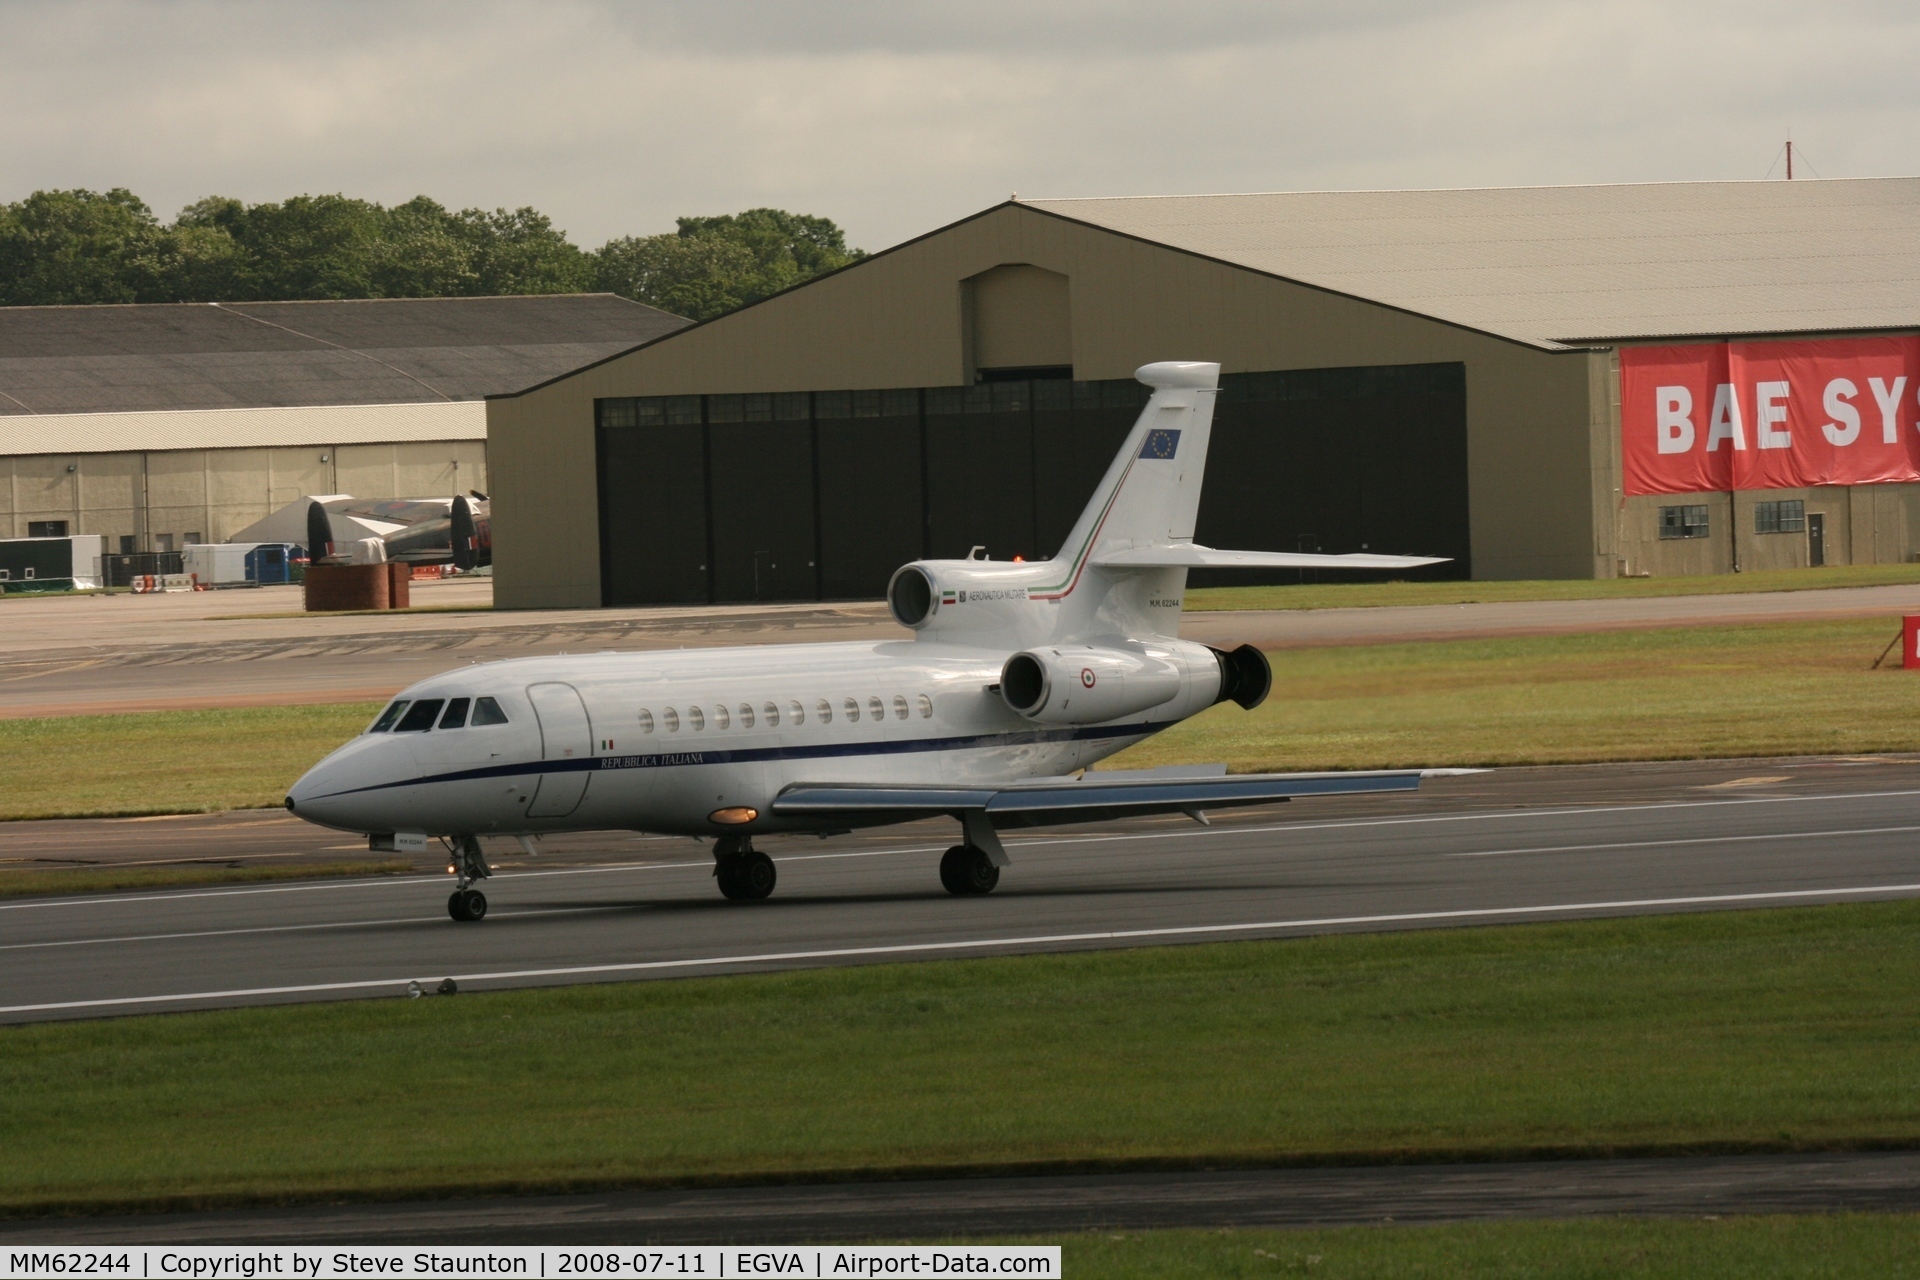 MM62244, 2005 Dassault Falcon 900EX C/N 149, Taken at the Royal International Air Tattoo 2008 during arrivals and departures (show days cancelled due to bad weather)